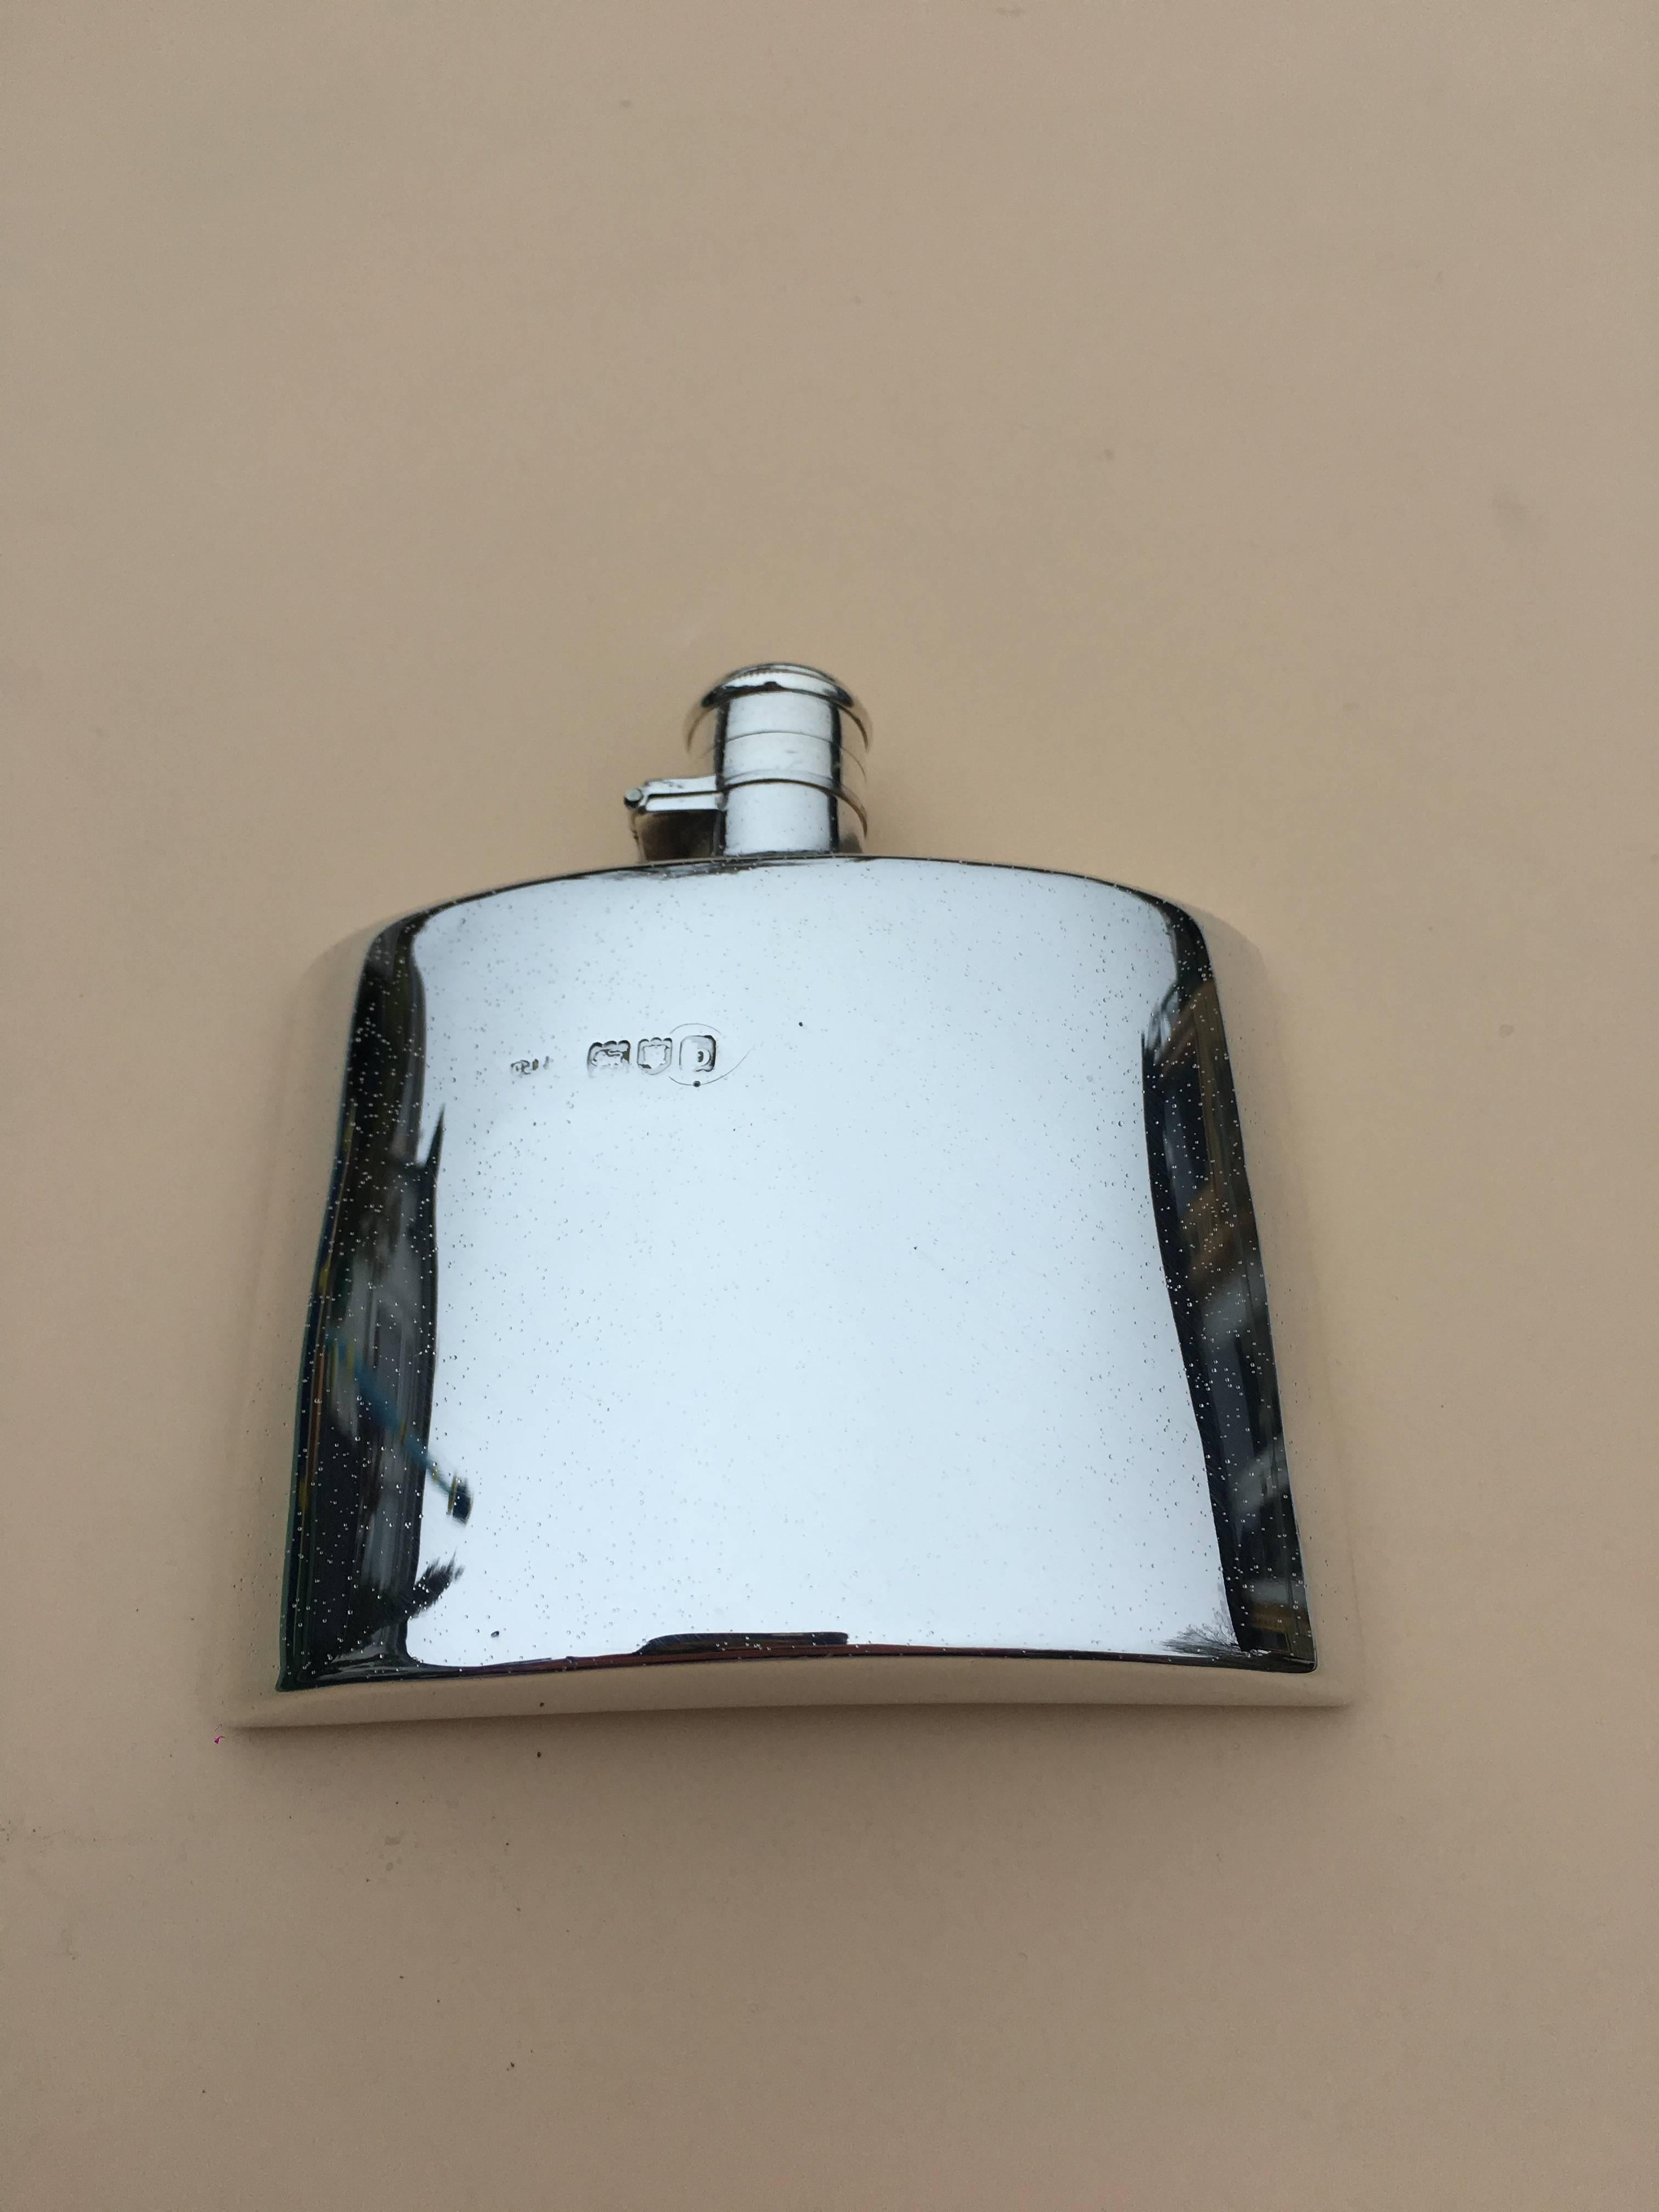 Hand-Crafted Victorian Silver Hip Flask by Charles Fox & Co Ltd Date 1897